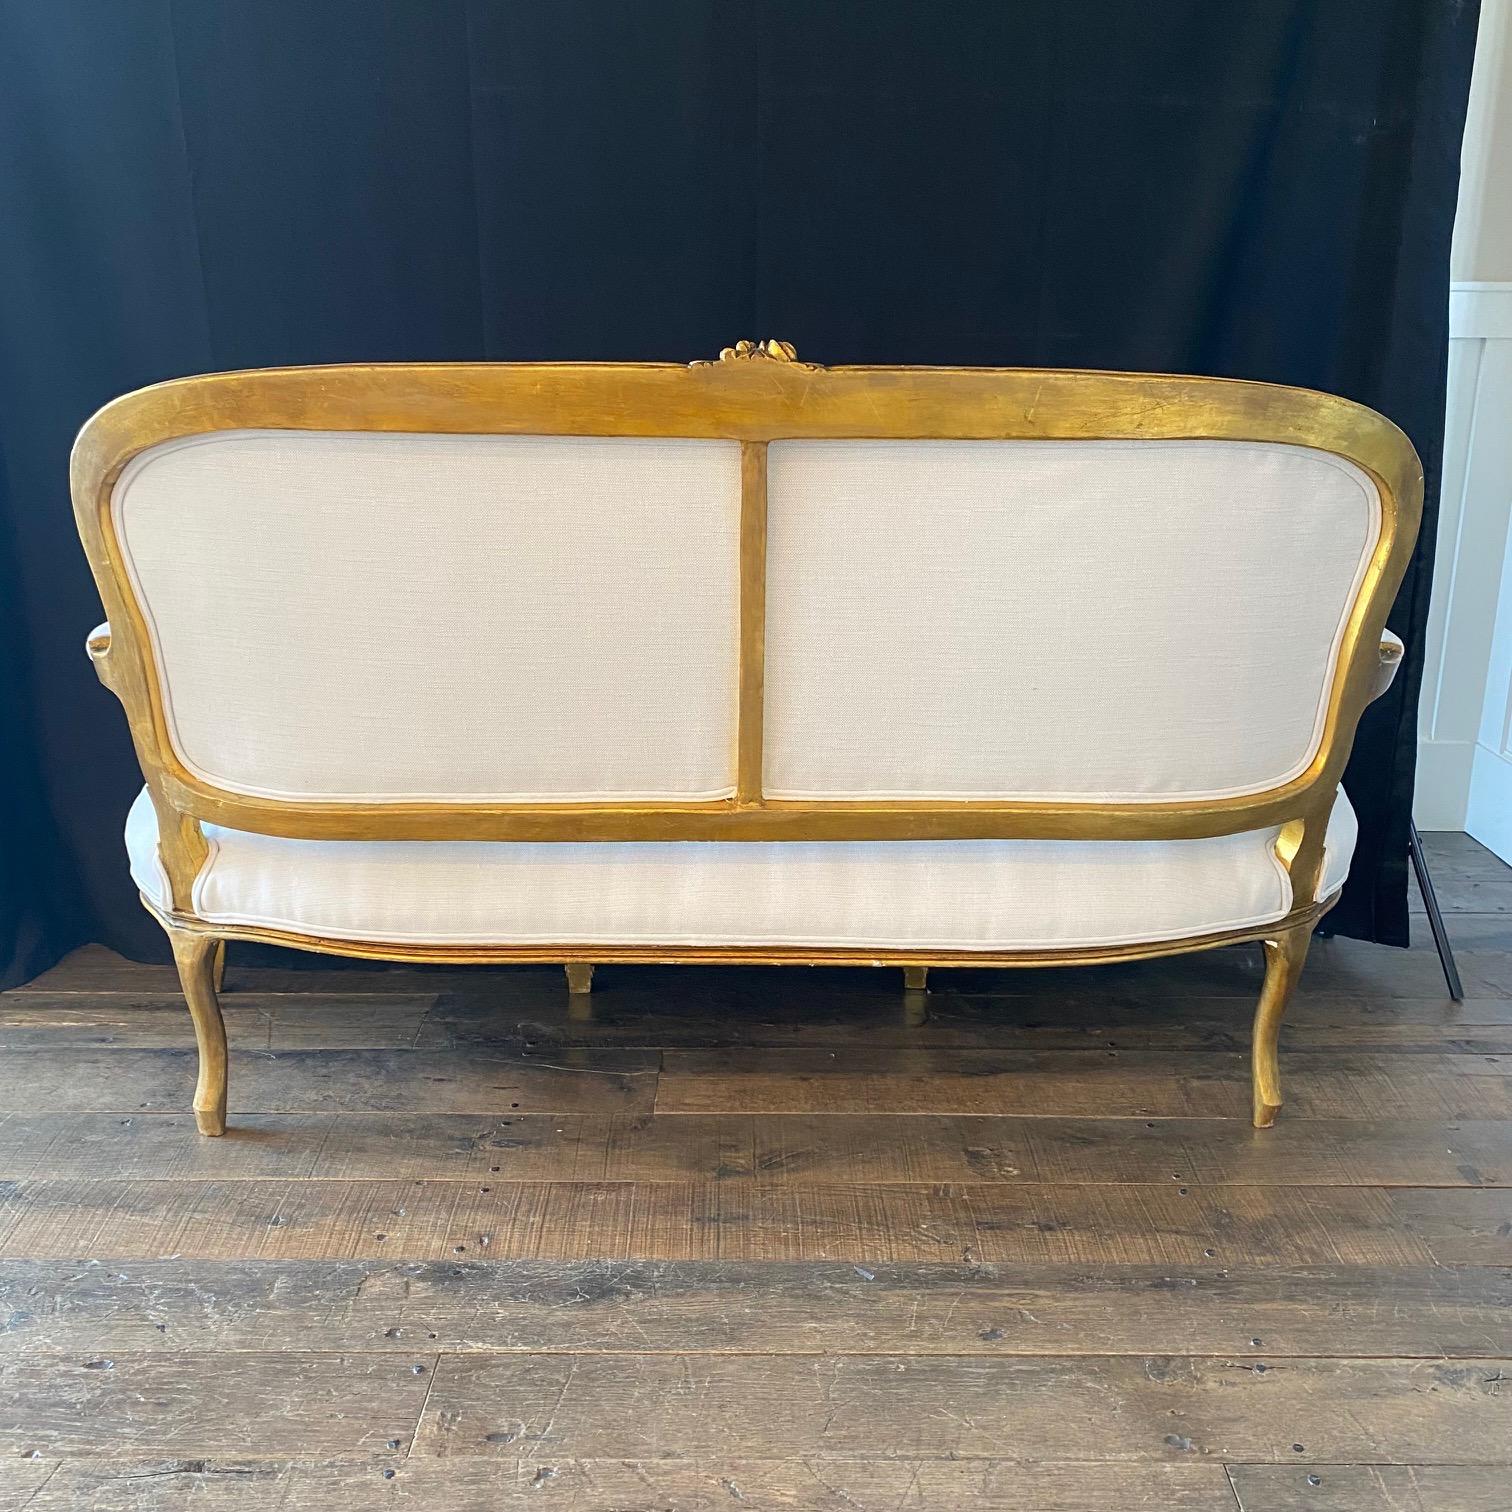 French Gold Giltwood Louis XV Sofa, Loveseat or Settee Newly Reupholstered  For Sale 2